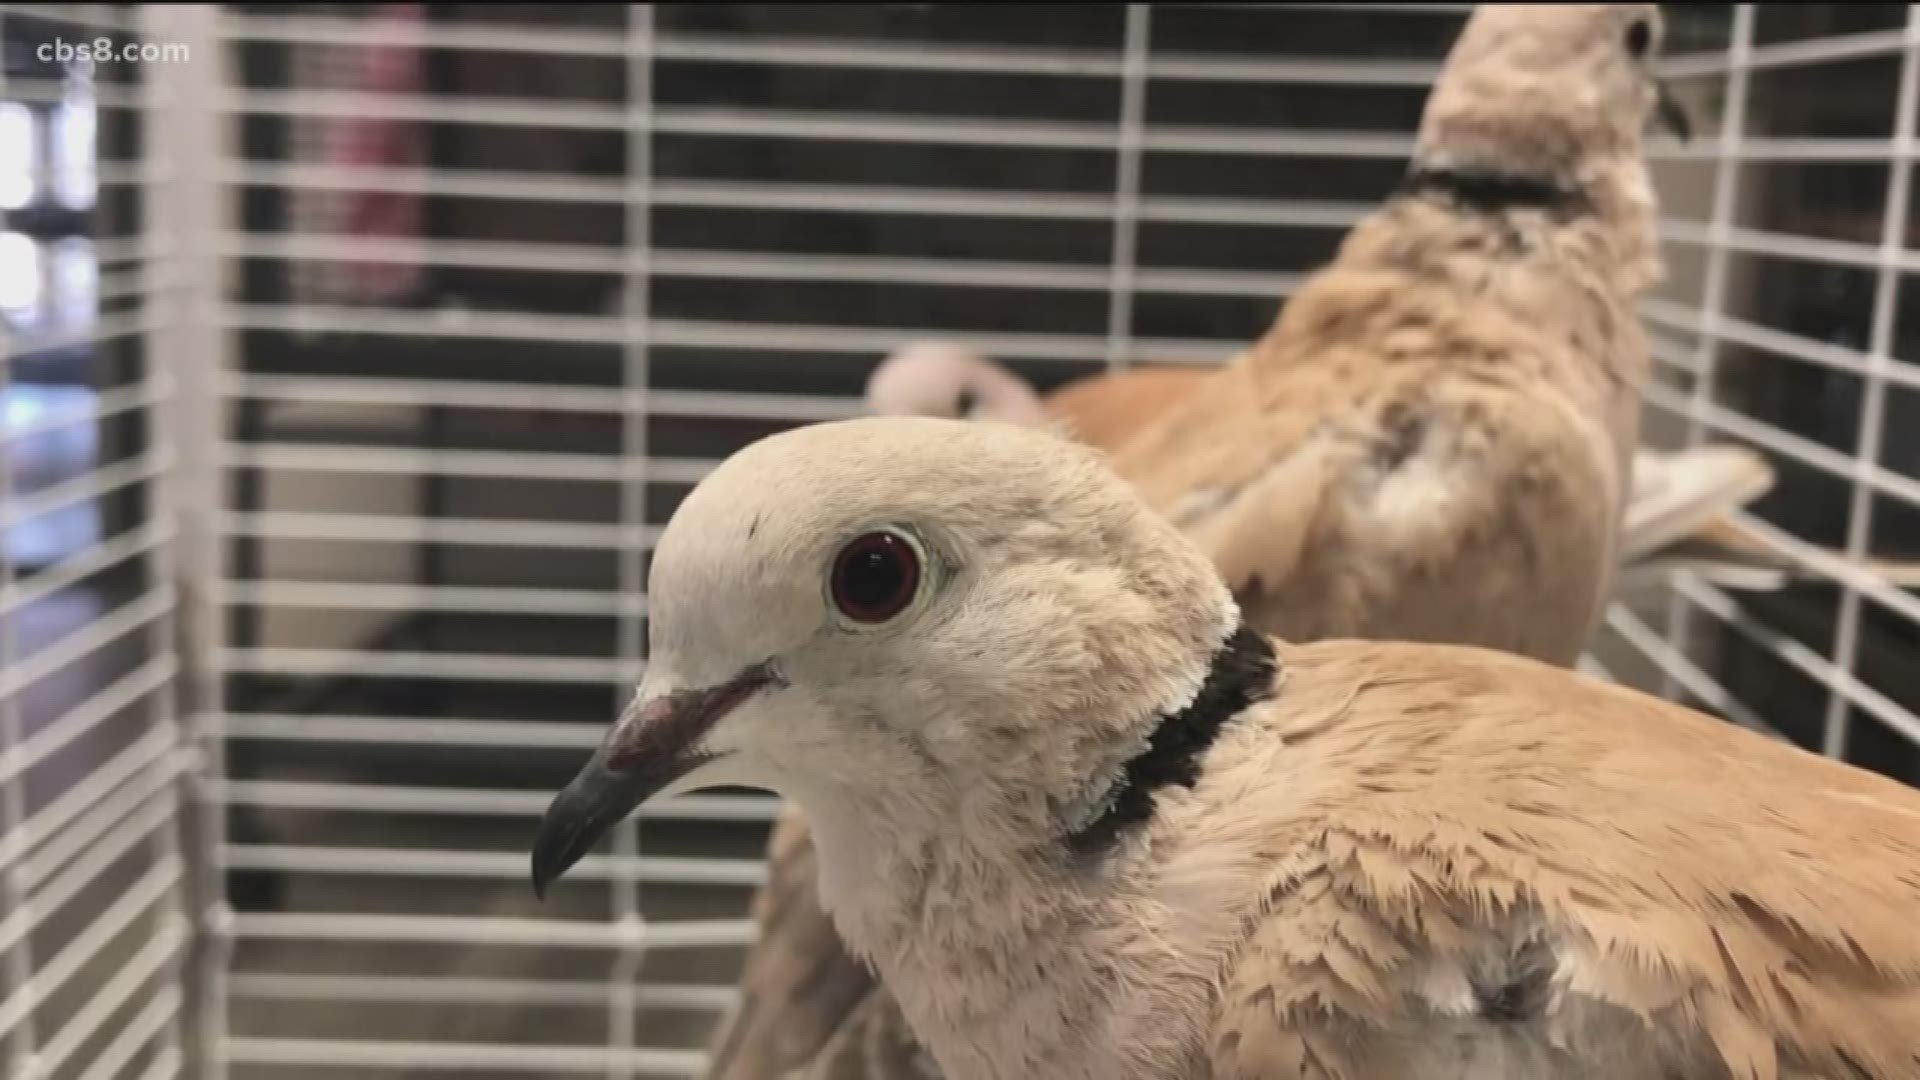 The pigeons and doves were brought to the Humane Society on April 25 after their owner surrendered them